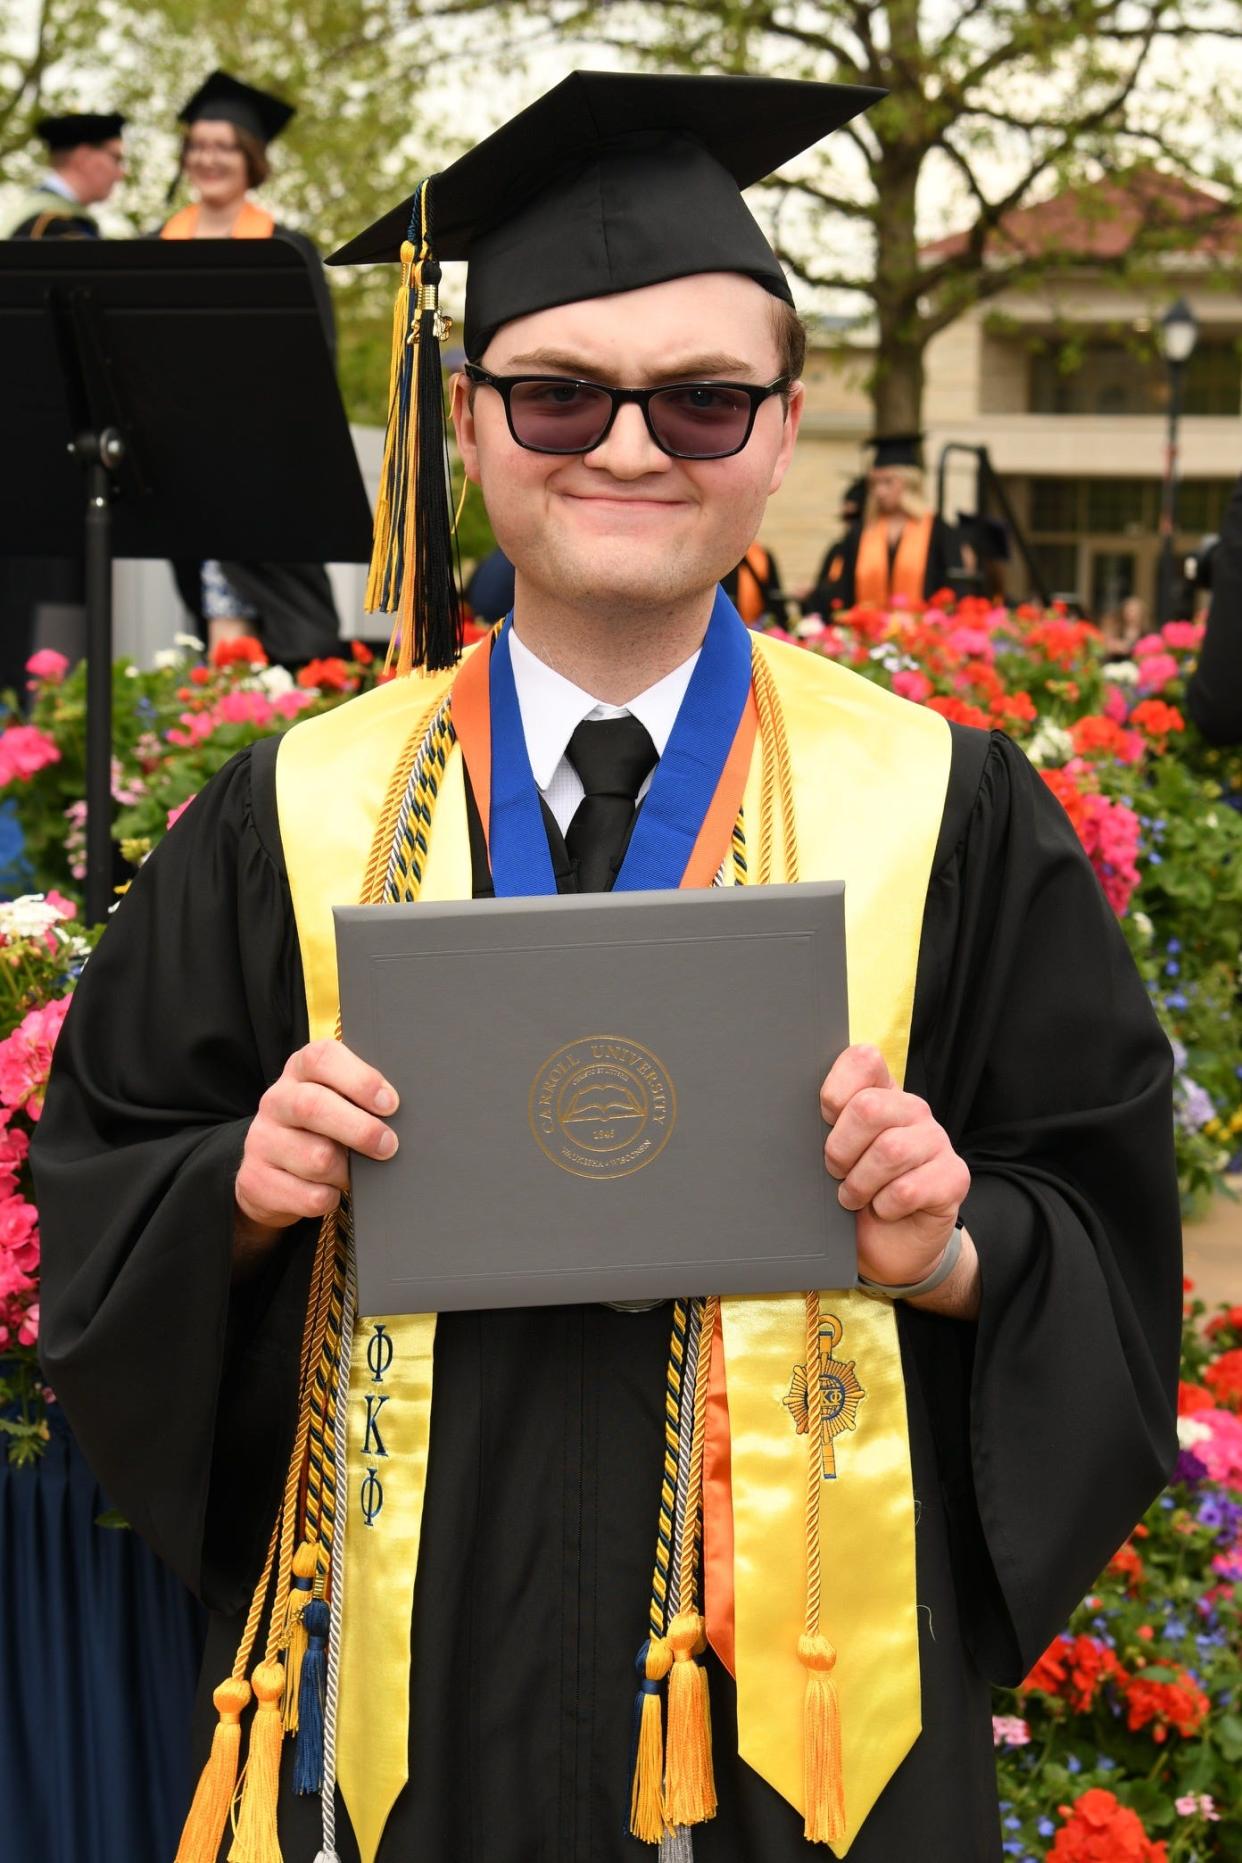 Anthony Sikorski graduated this spring from Carroll University at age 18. He earned a bachelor's degree in biology, with minors in math and biochemistry.